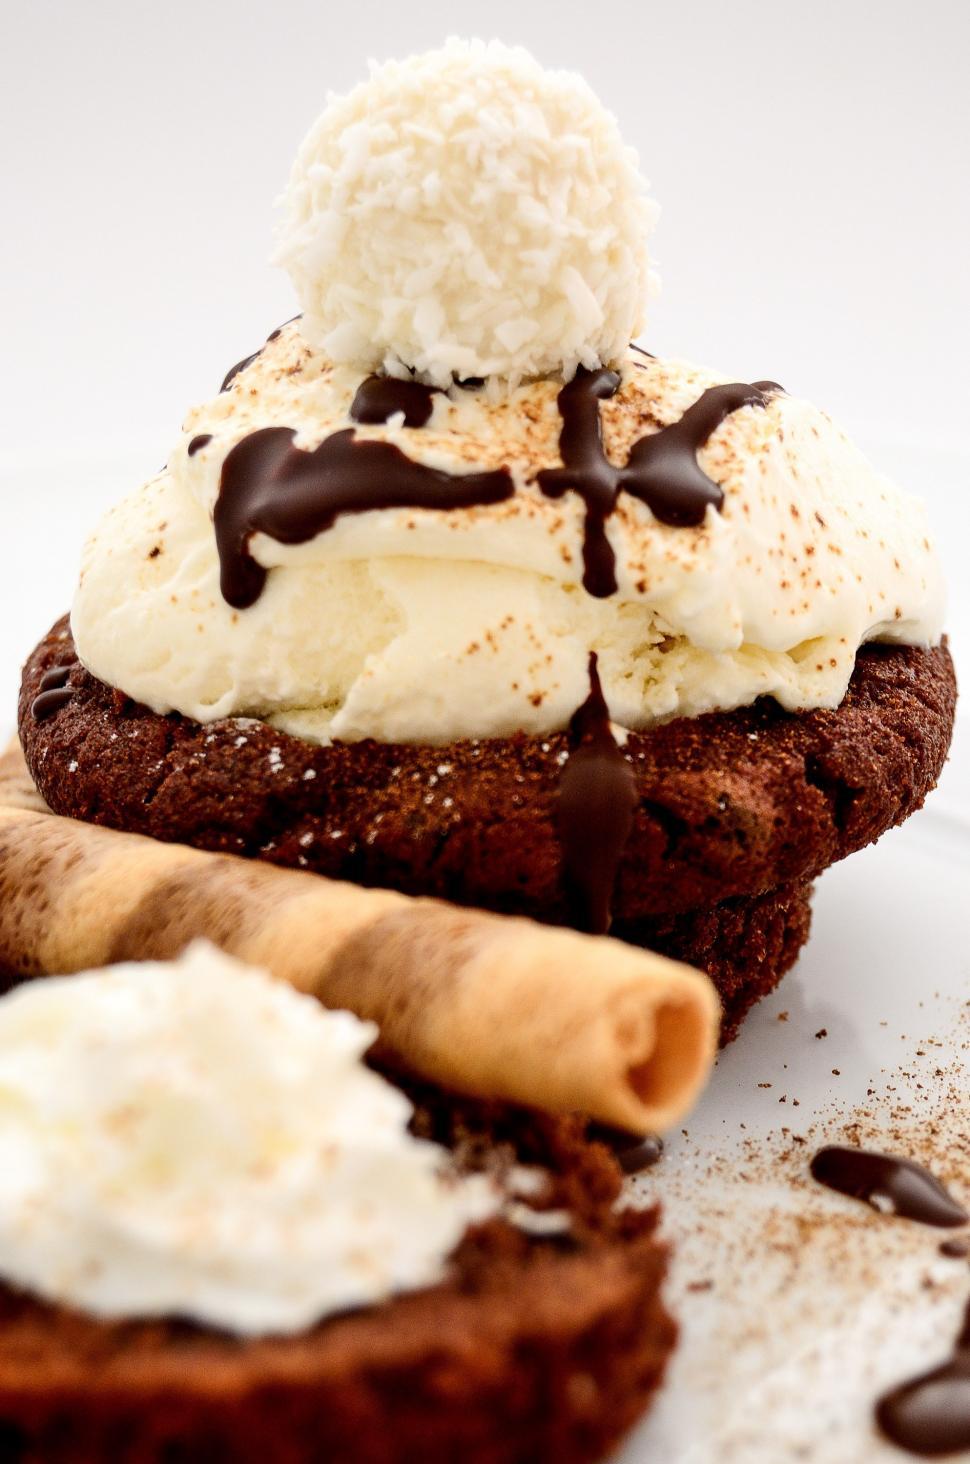 Free Image of Decadent Chocolate Dessert With Whipped Cream 